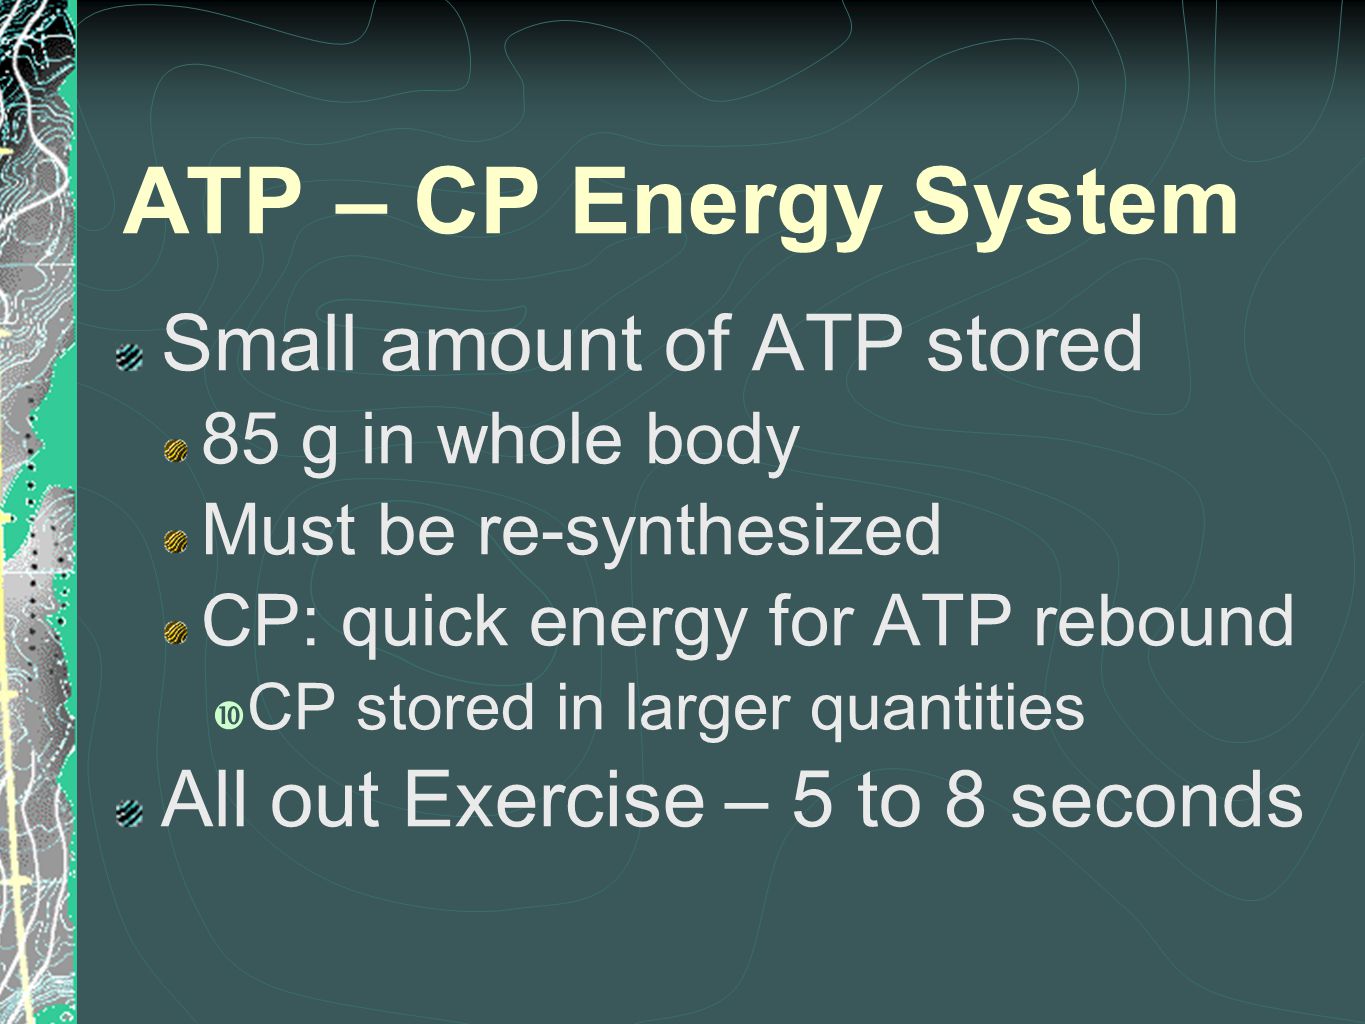 ATP – CP Energy System Small amount of ATP stored 85 g in whole body Must be re-synthesized CP: quick energy for ATP rebound  CP stored in larger quantities All out Exercise – 5 to 8 seconds